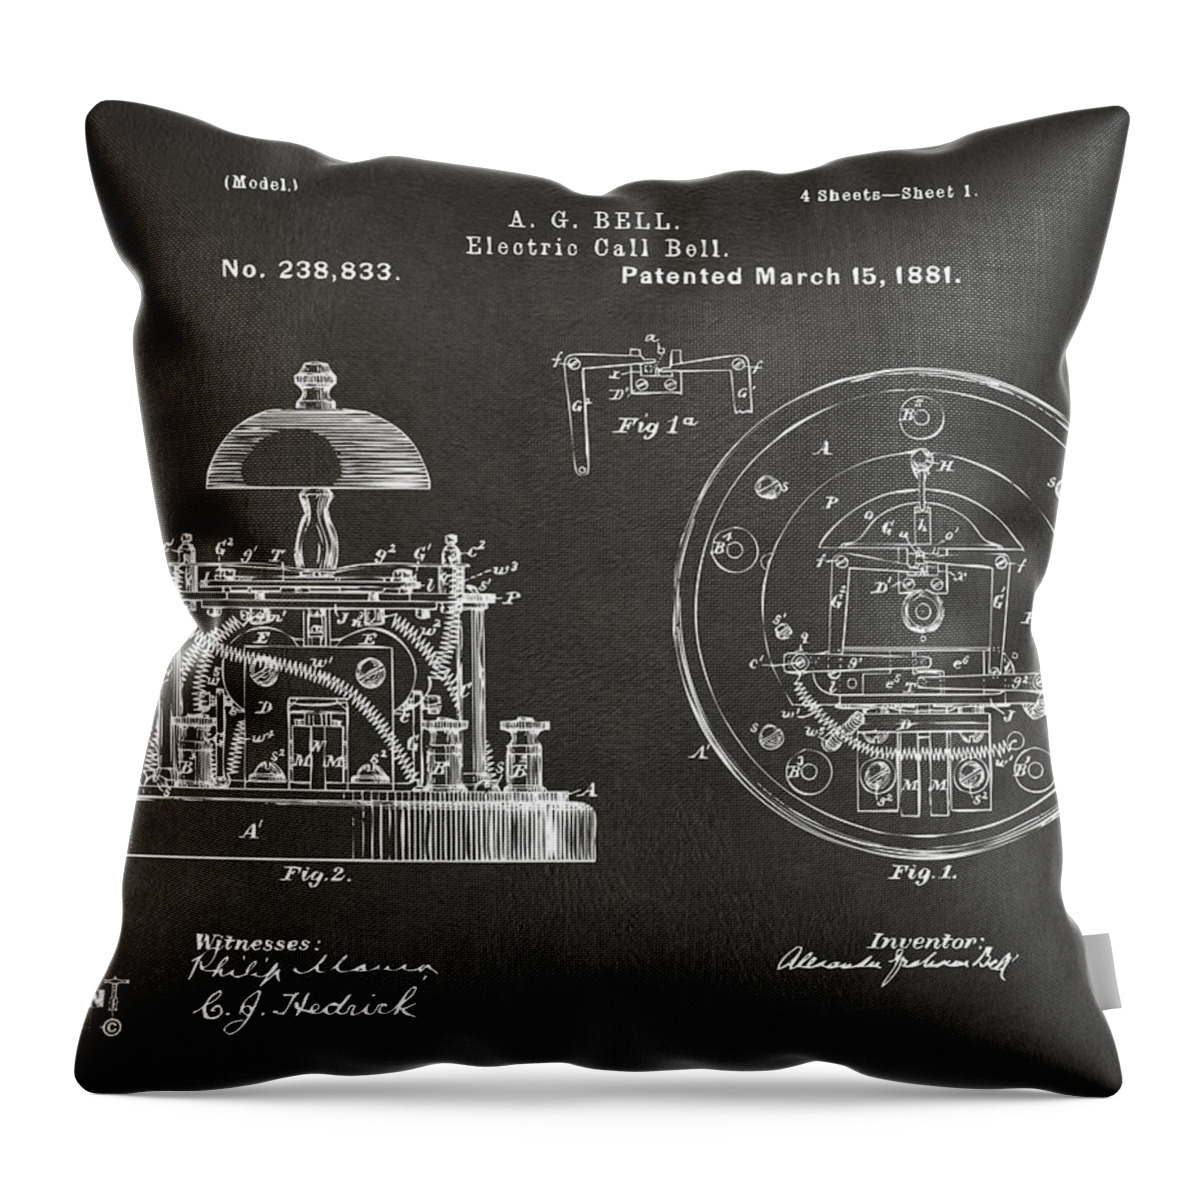 Alexander Graham Bell Throw Pillow featuring the digital art 1881 Alexander Graham Bell Electric Call Bell Patent Gray by Nikki Marie Smith